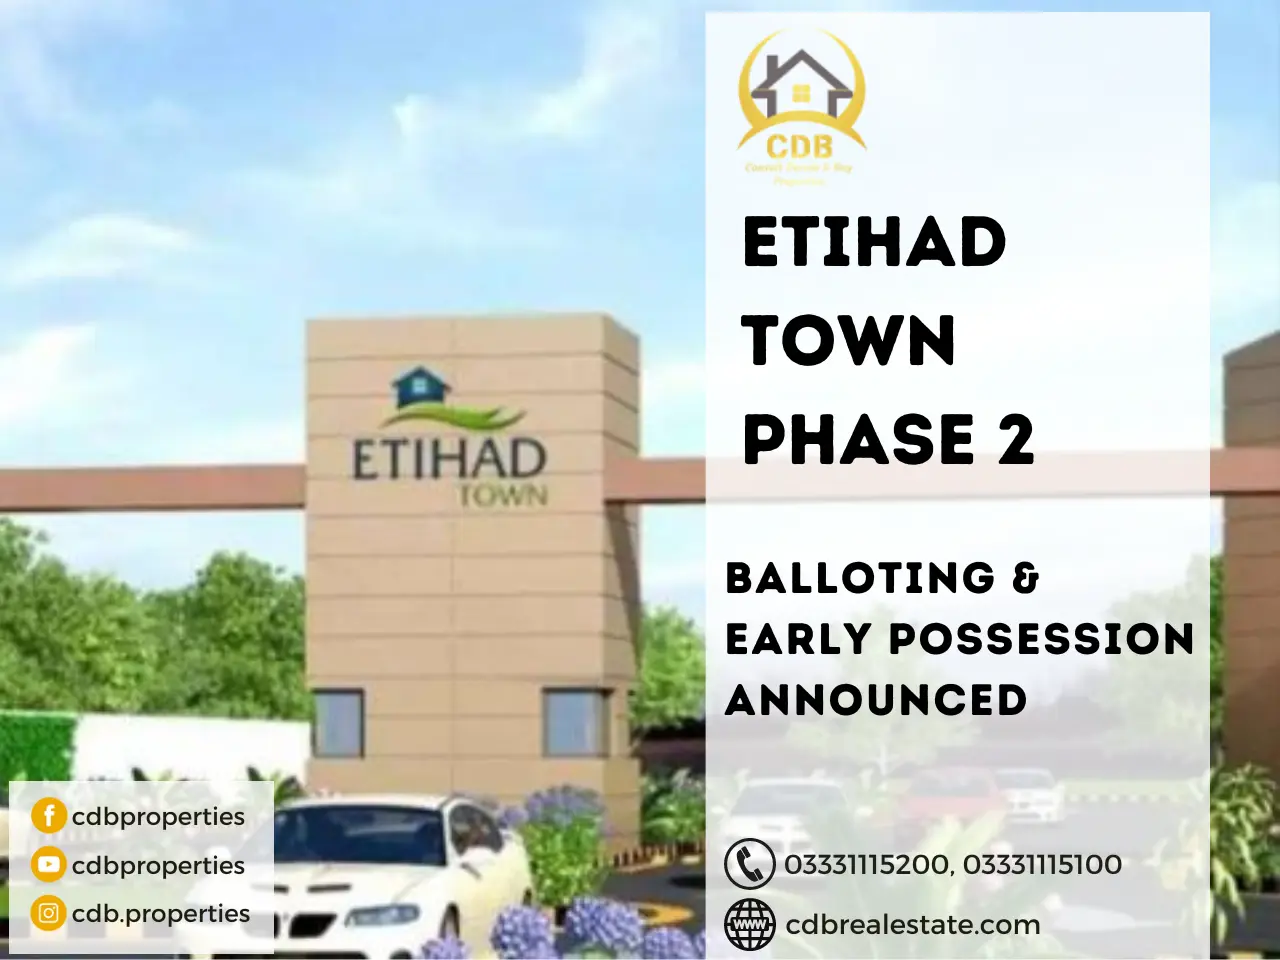 Etihad Town Phase 2 - Balloting & Early Possession Announced